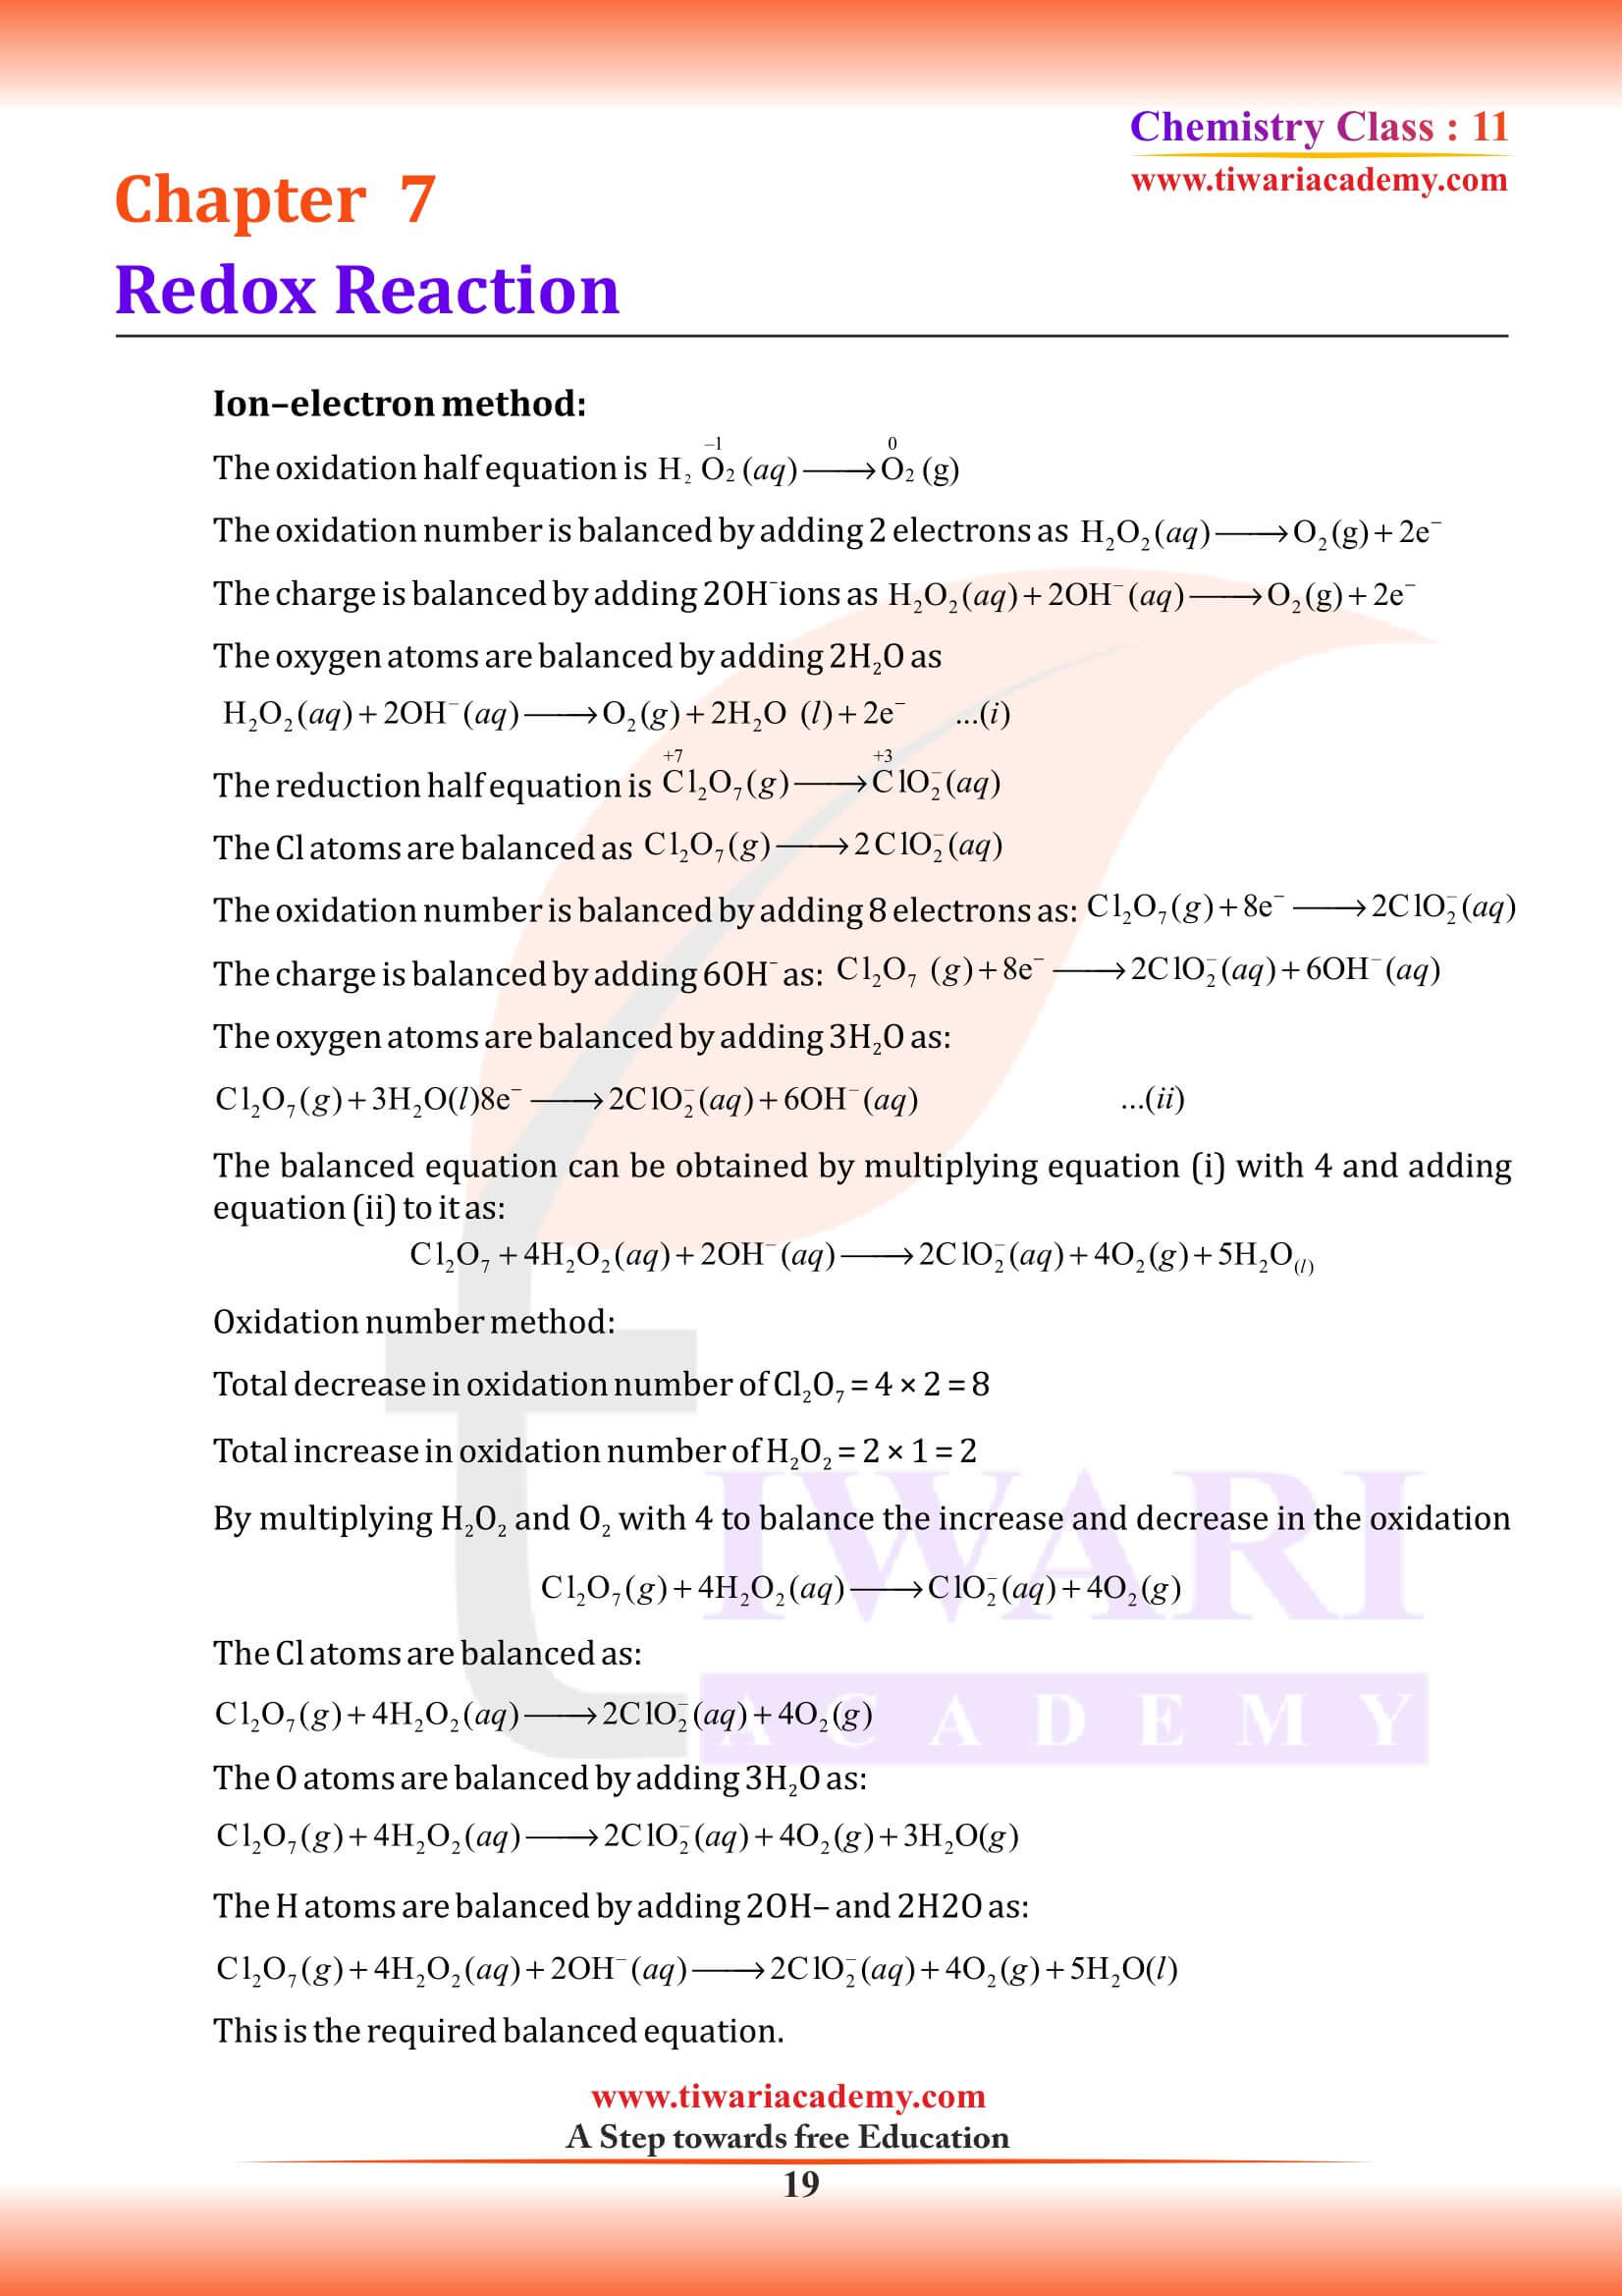 Class 11 Chemistry Chapter 7 Exercises Answers